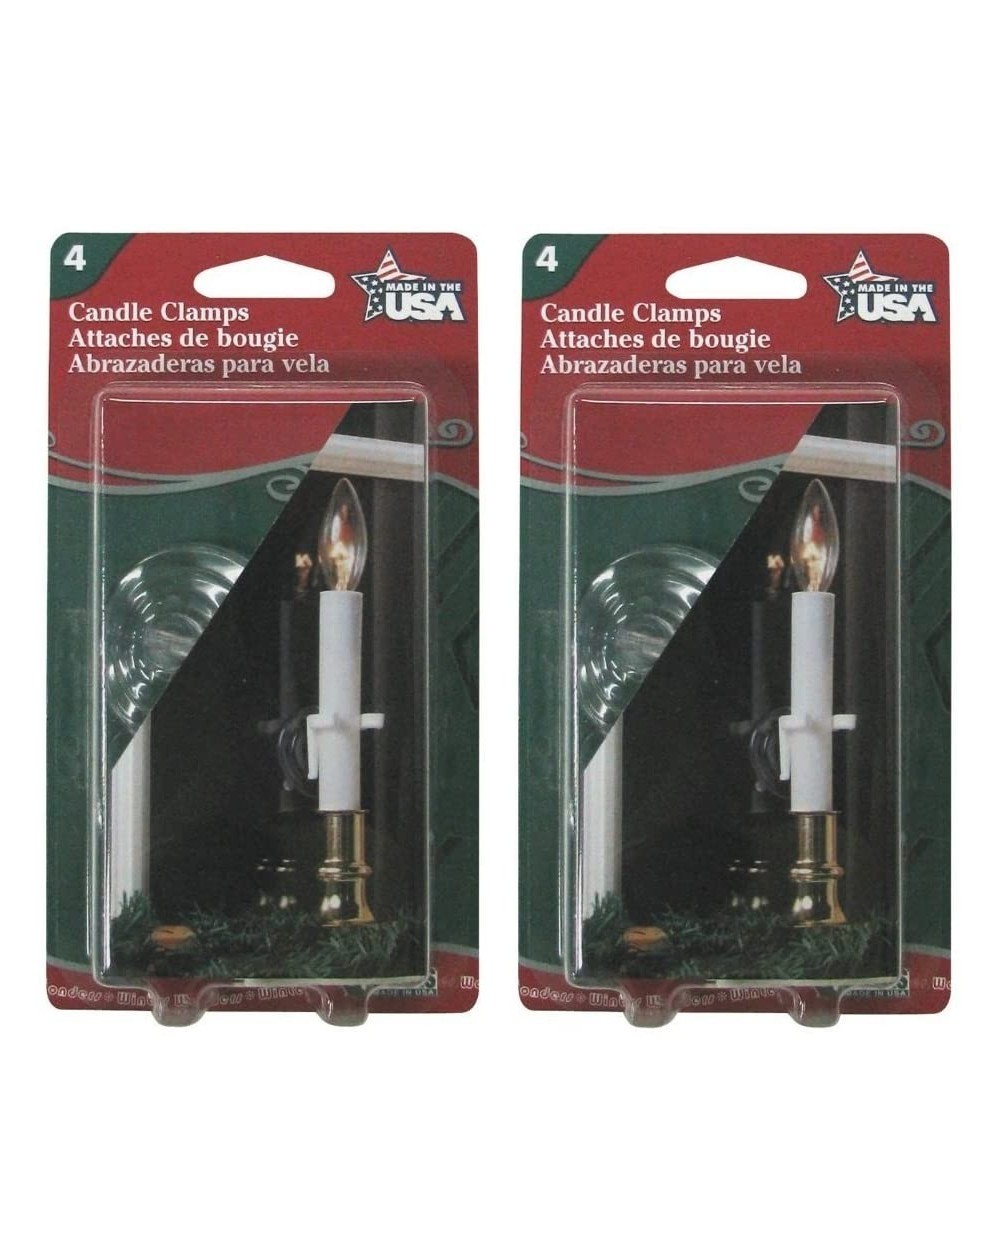 Candles Adams Christmas 1550-99 Candle Clamps 8 pack (there are 2 packs of 4 in the bag) - CA11SZ2DN0B $12.70